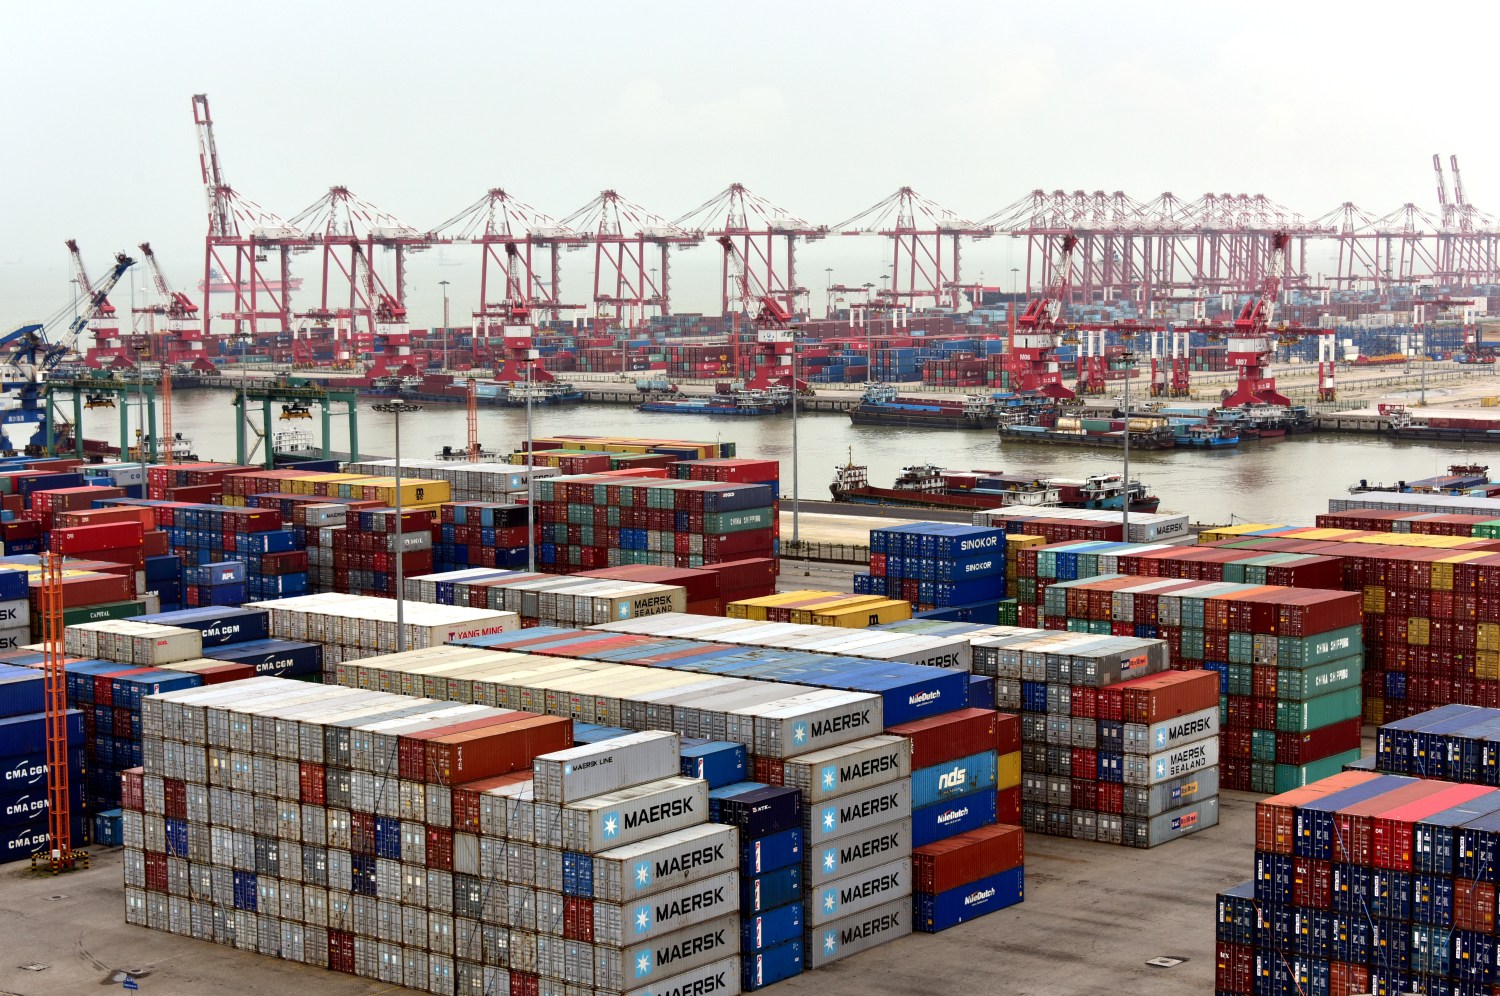 Shipping containers are seen at Nansha terminal of Guangzhou port, in Guangdong province, China June 14, 2017. Picture taken June 14, 2017. REUTERS/Stringer ATTENTION EDITORS - THIS IMAGE WAS PROVIDED BY A THIRD PARTY. CHINA OUT. NO COMMERCIAL OR EDITORIAL SALES IN CHINA. - RC1D40E1D4E0